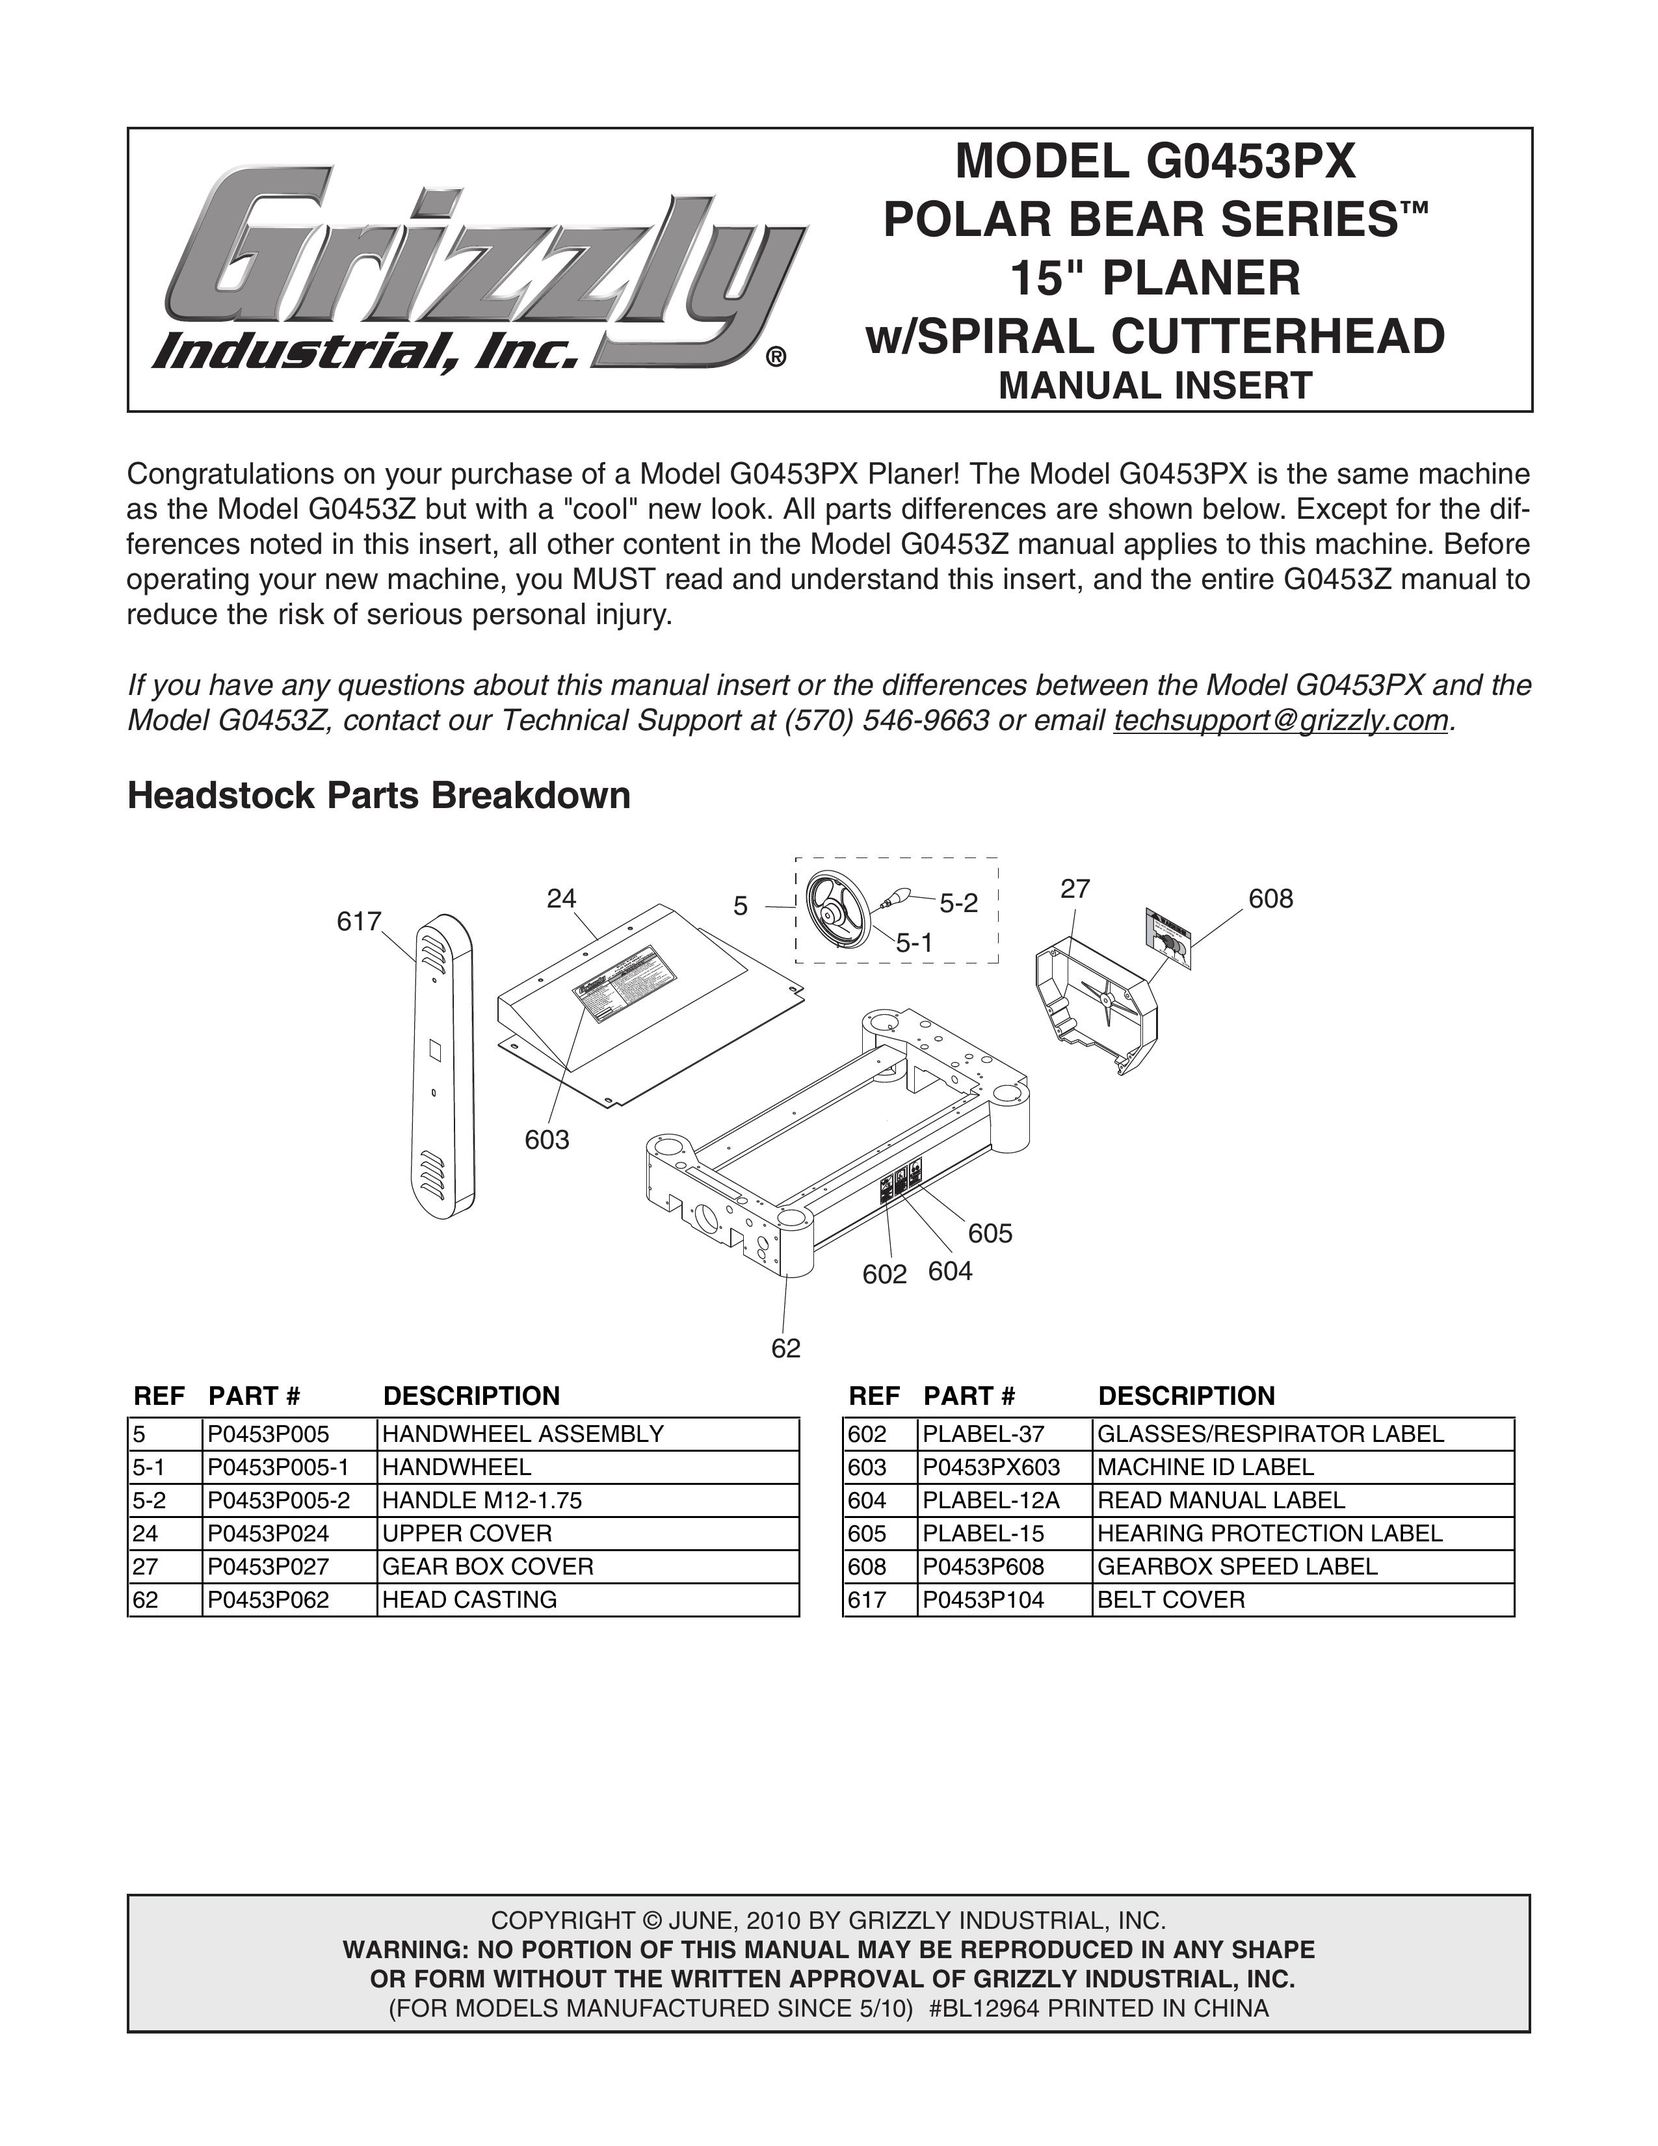 Grizzly G0453PX Planer User Manual